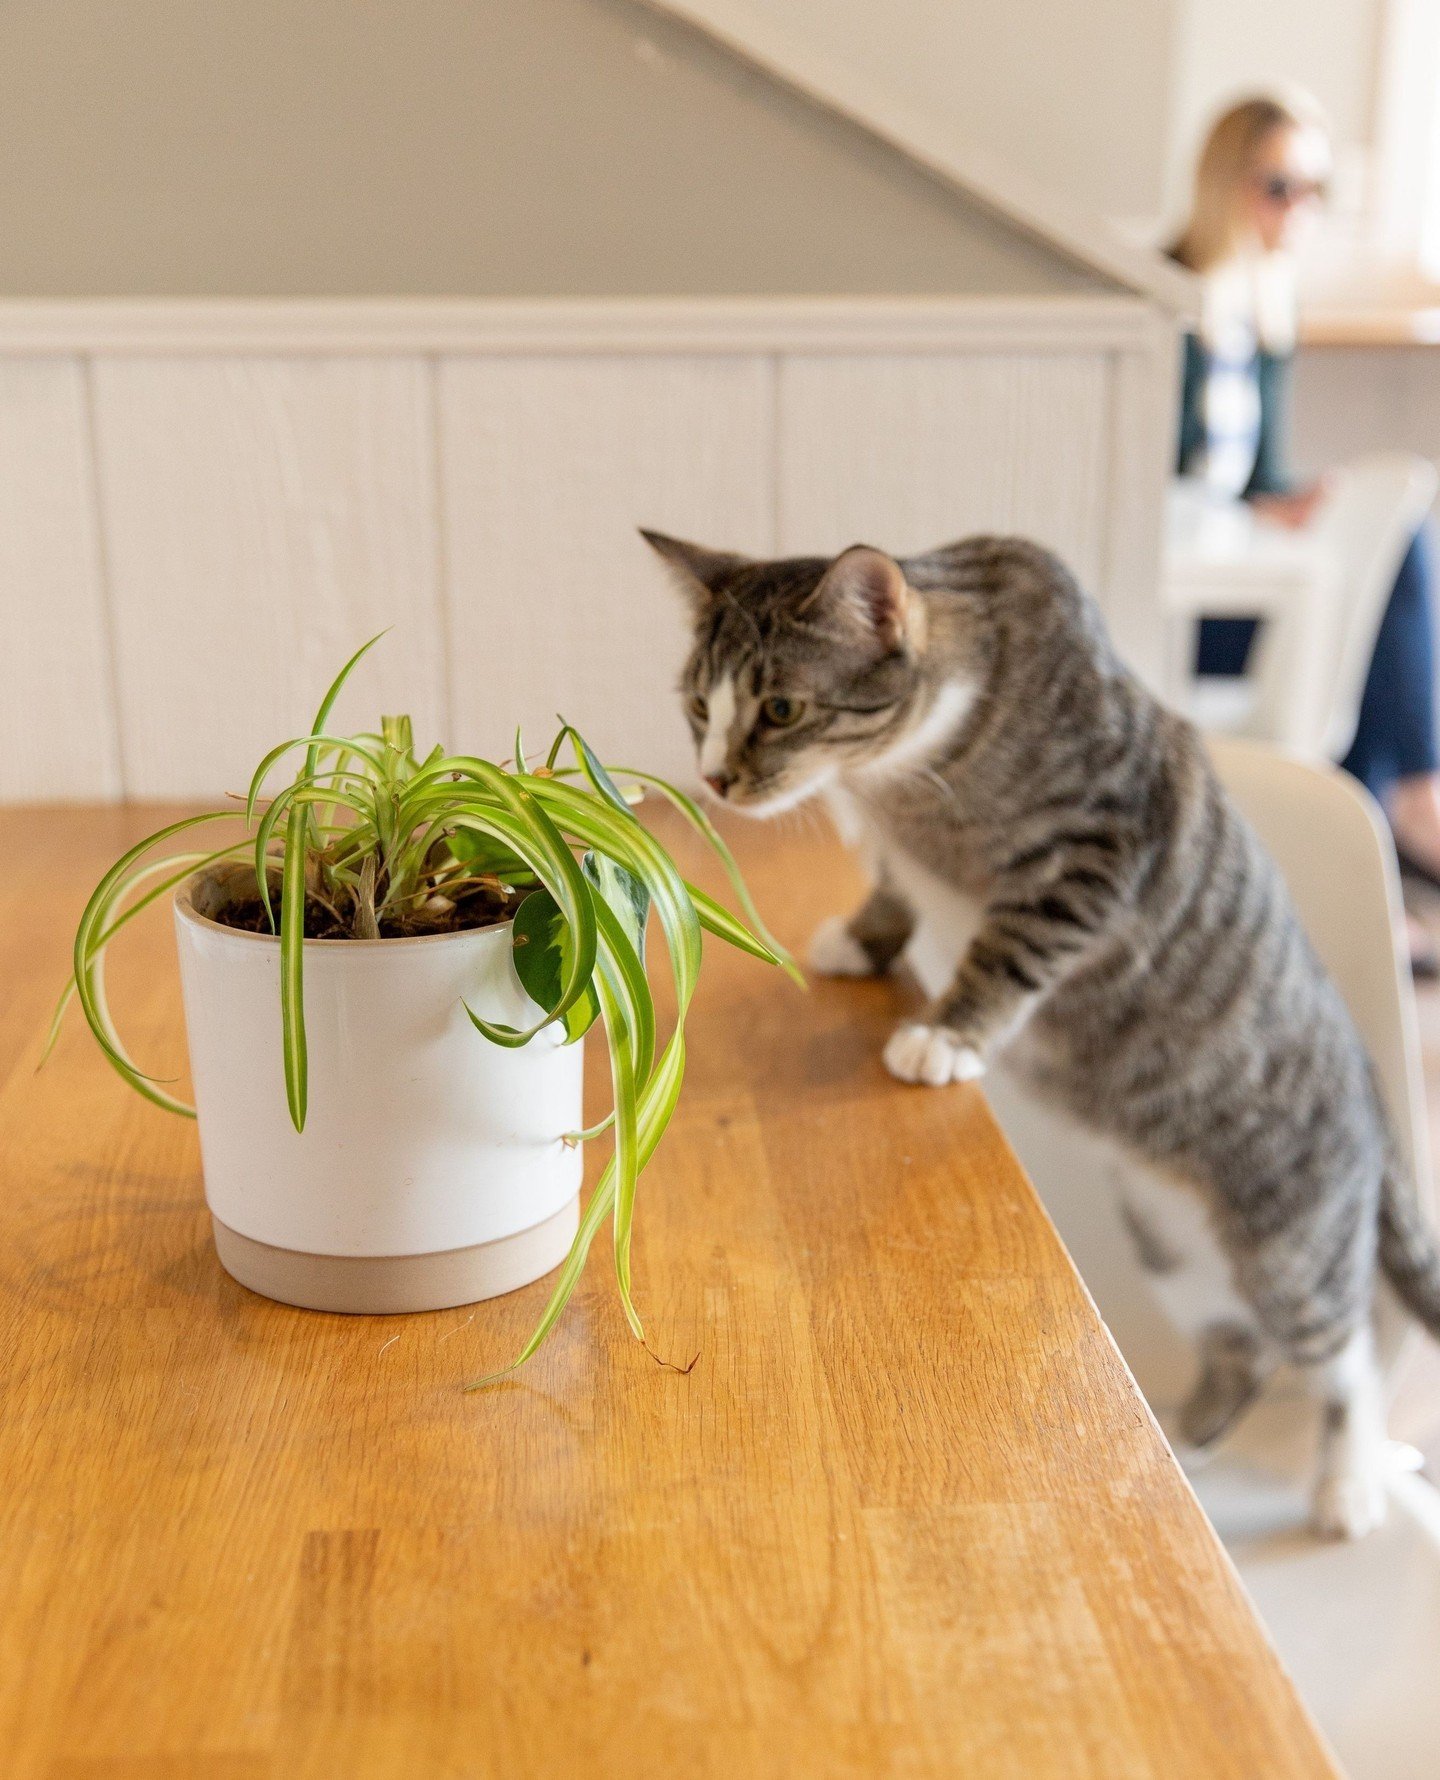 Join us between 5PM and 8PM on Wednesday, May 15th for our first Plants for Paws plant sale! 🐾 ⁠
⁠
Stop in the Catfe to purchase plants and 100% of the proceeds will benefit our nonprofit partner, Gem City Kitties! Together, both Gem City Catfe and 